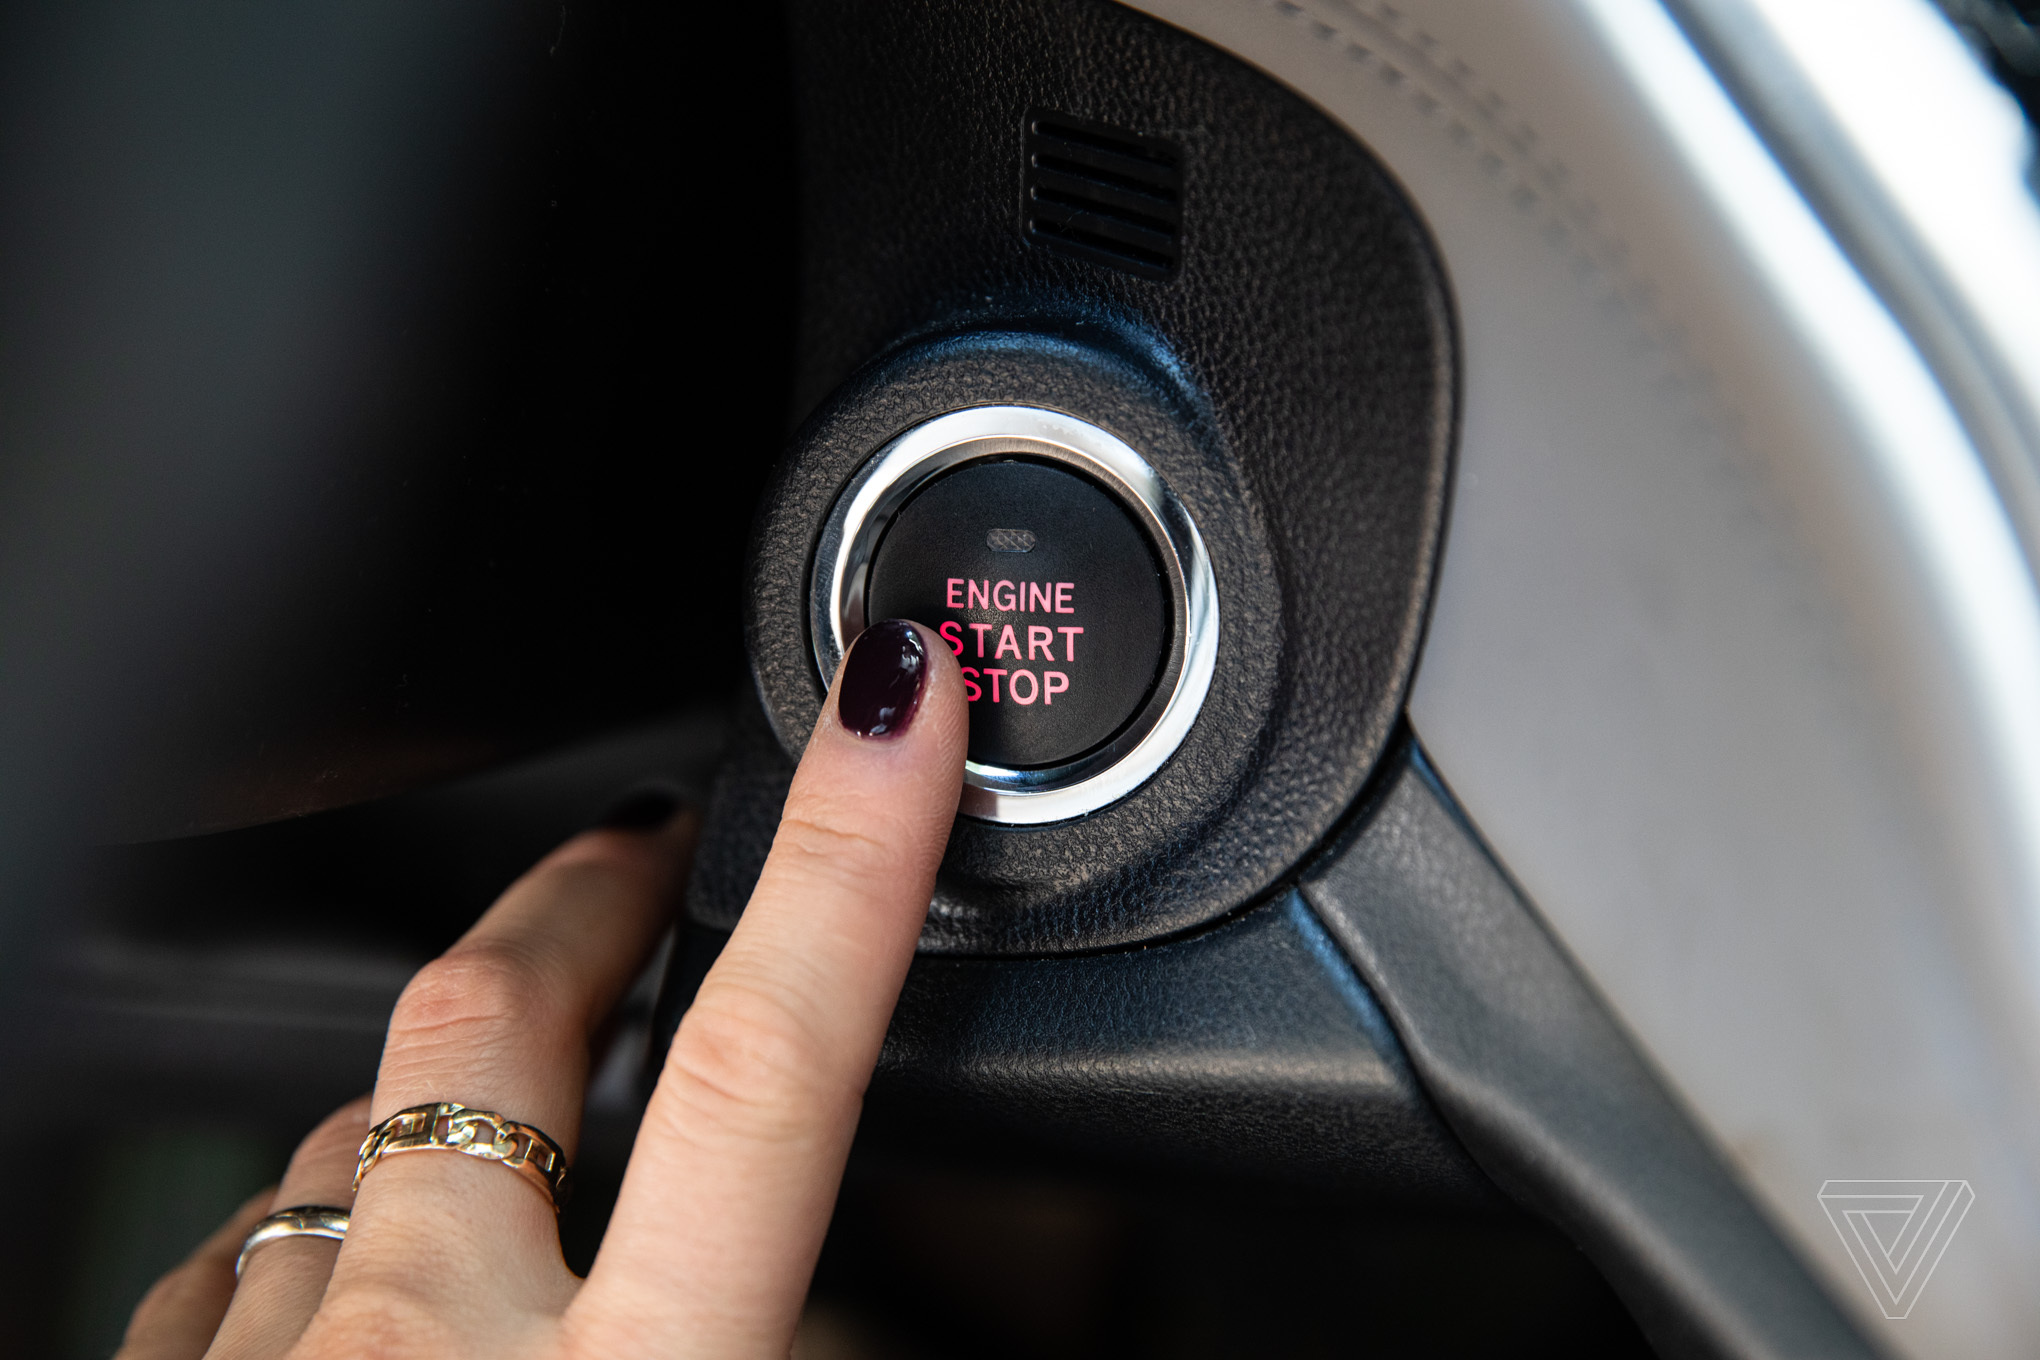 The push-button ignition was a luxurious way to start your car until it wasnt